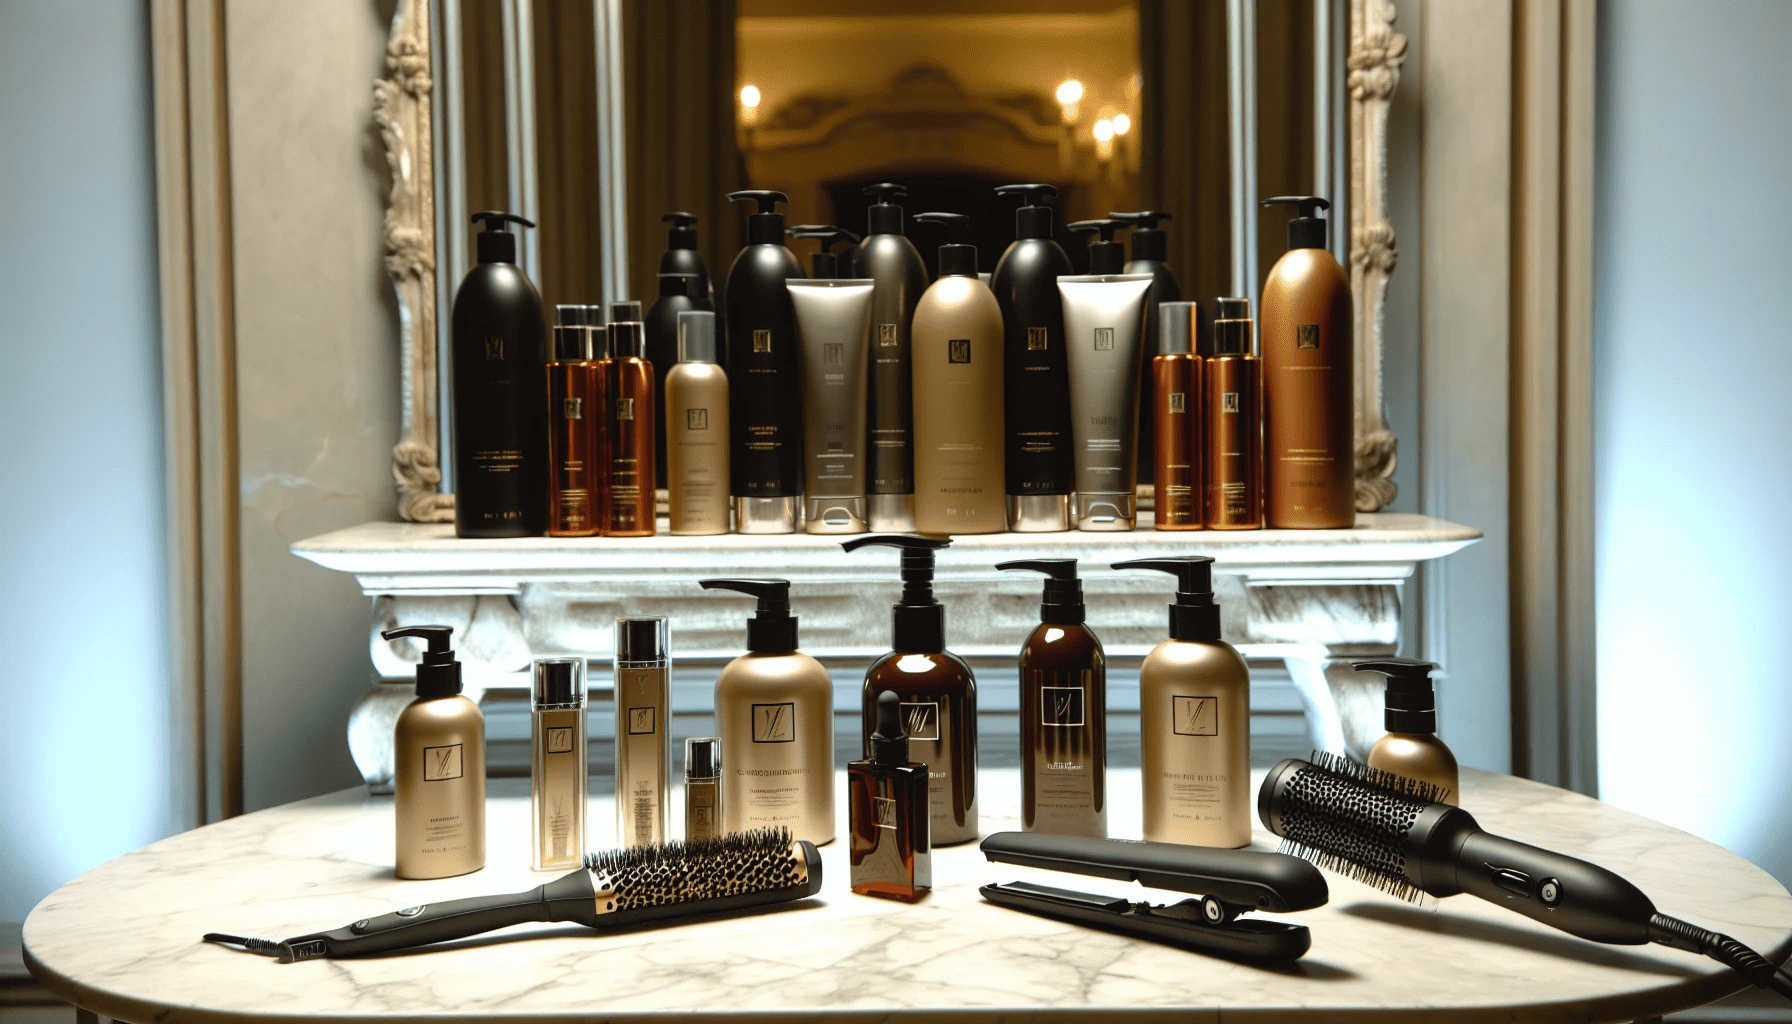 Luxury hair care products and styling tools